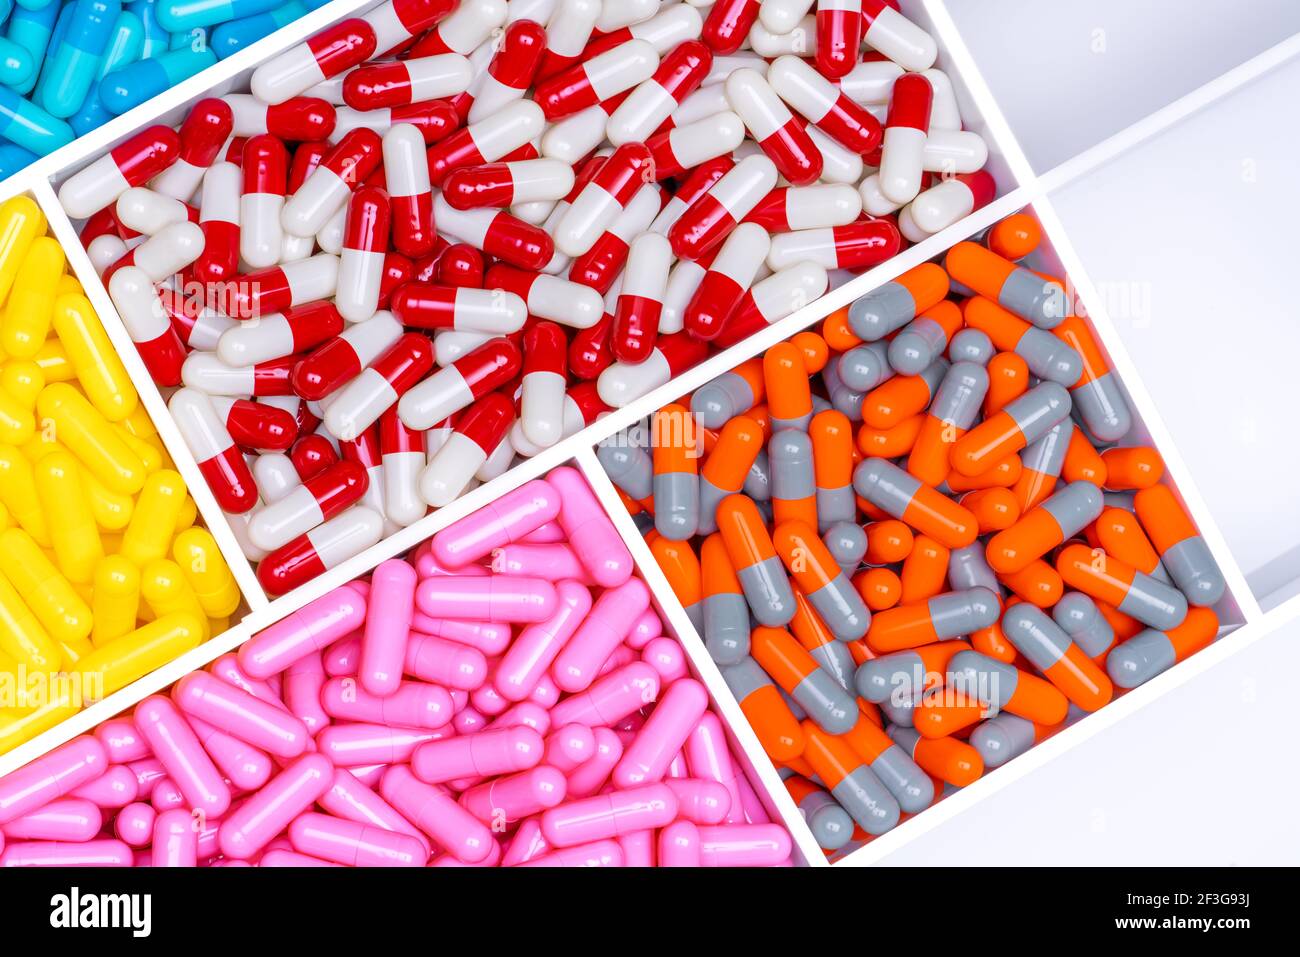 Top view of antibiotic capsule pills in plastic drug tray. Antibiotic resistance concept. Antibiotic drug selection. Drug interactions and pharmacolog Stock Photo